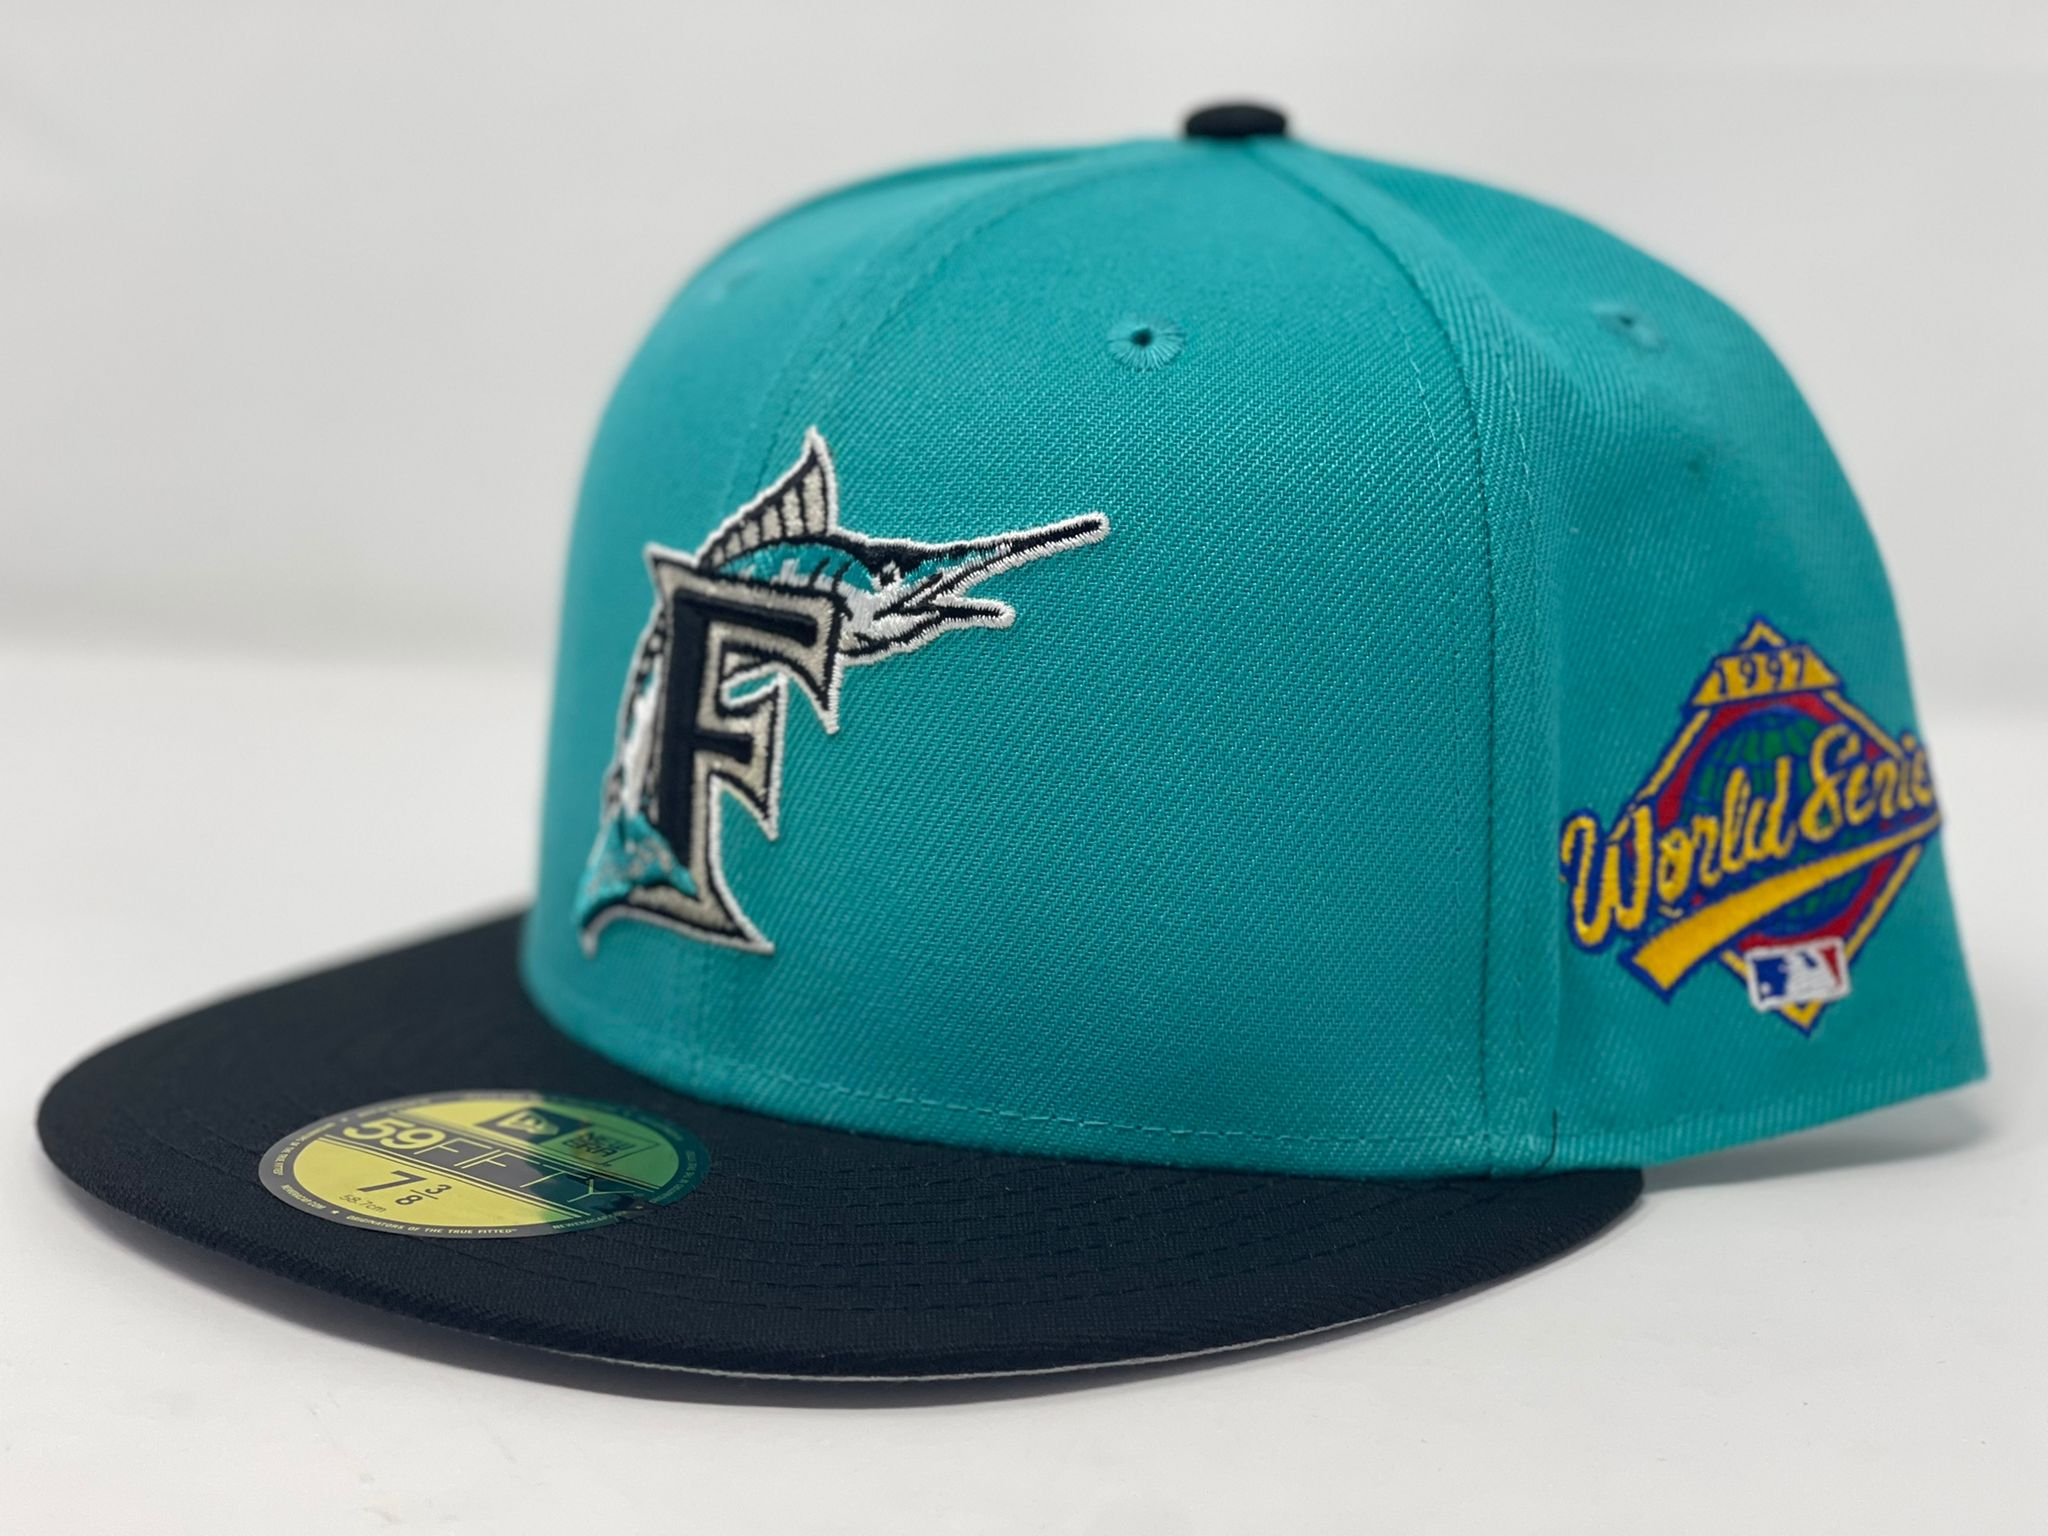 Florida Marlins Teal Black 1997 World Series – Exclusive Fitted Inc.